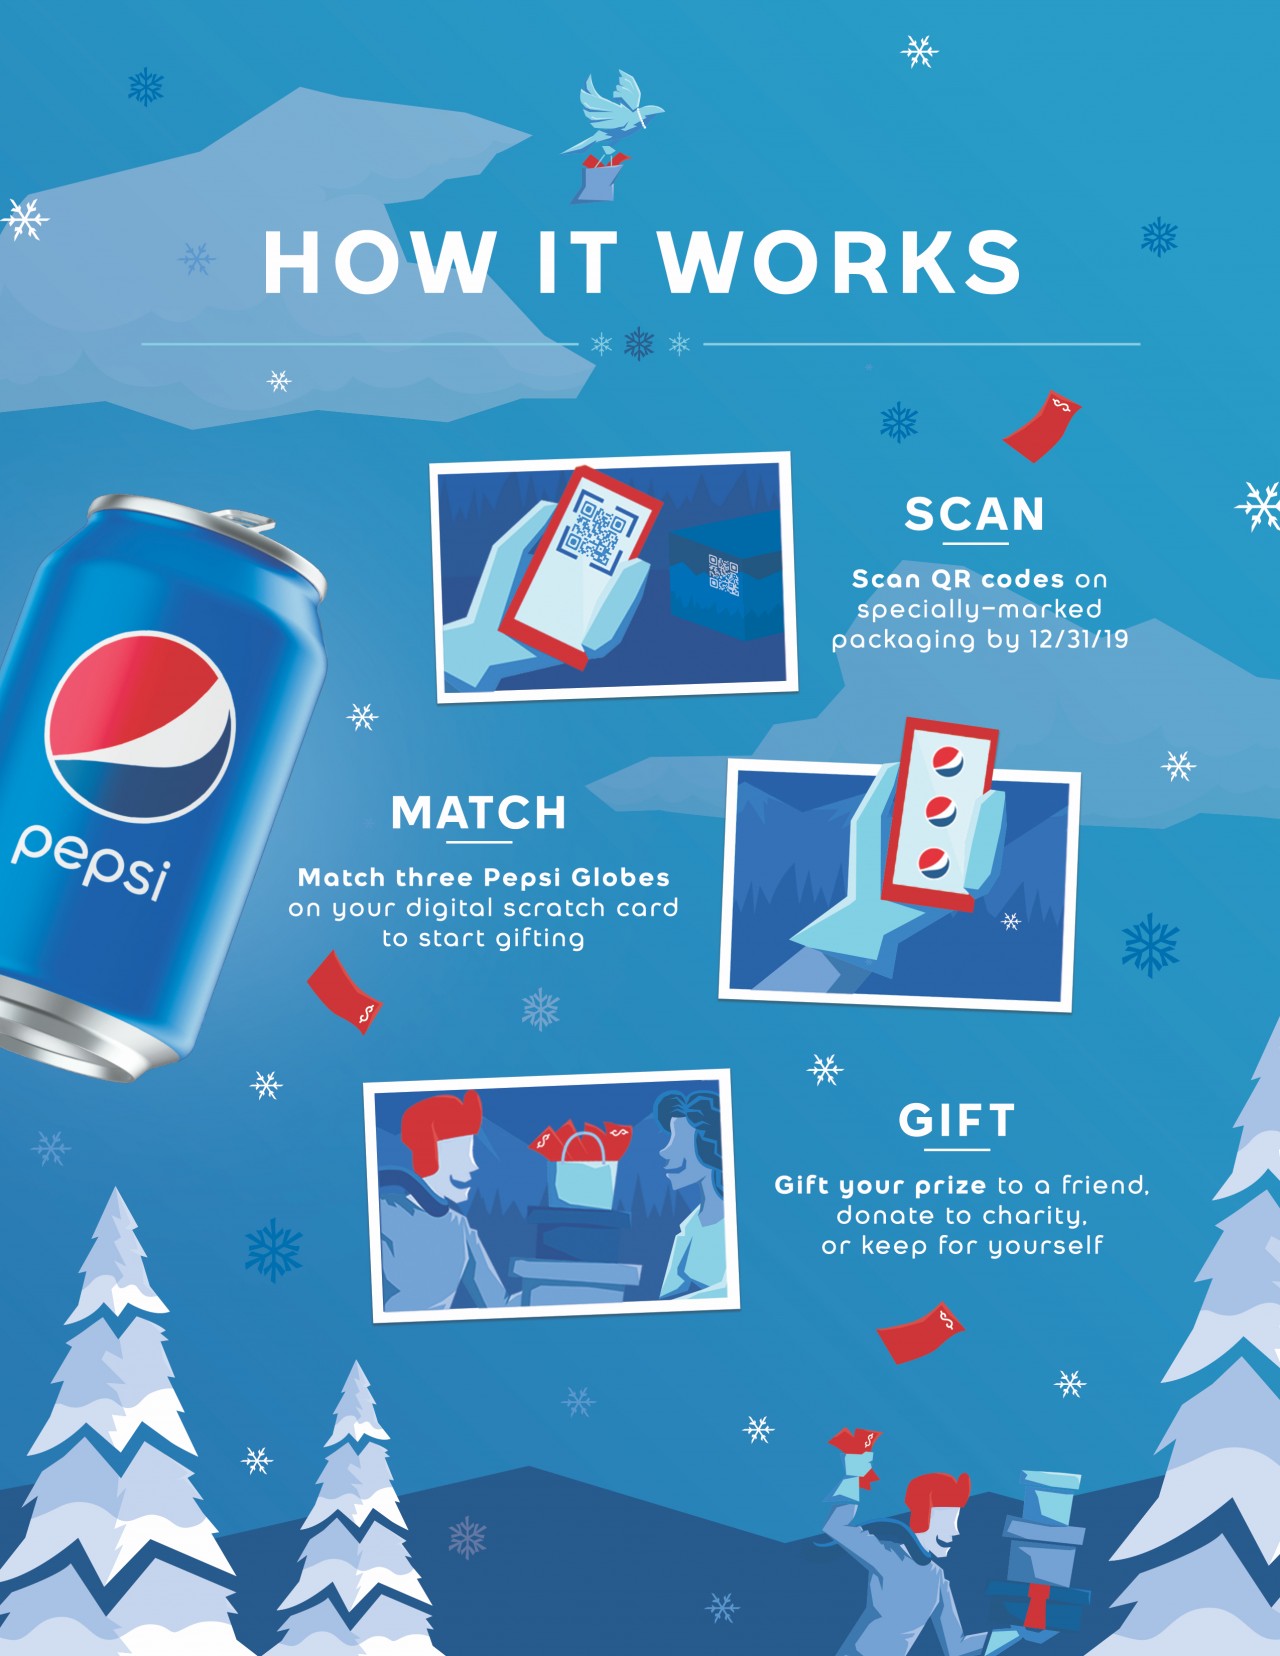 s3-gift_it_forward_with_pepsi_-_how_to--default--1280.jpg